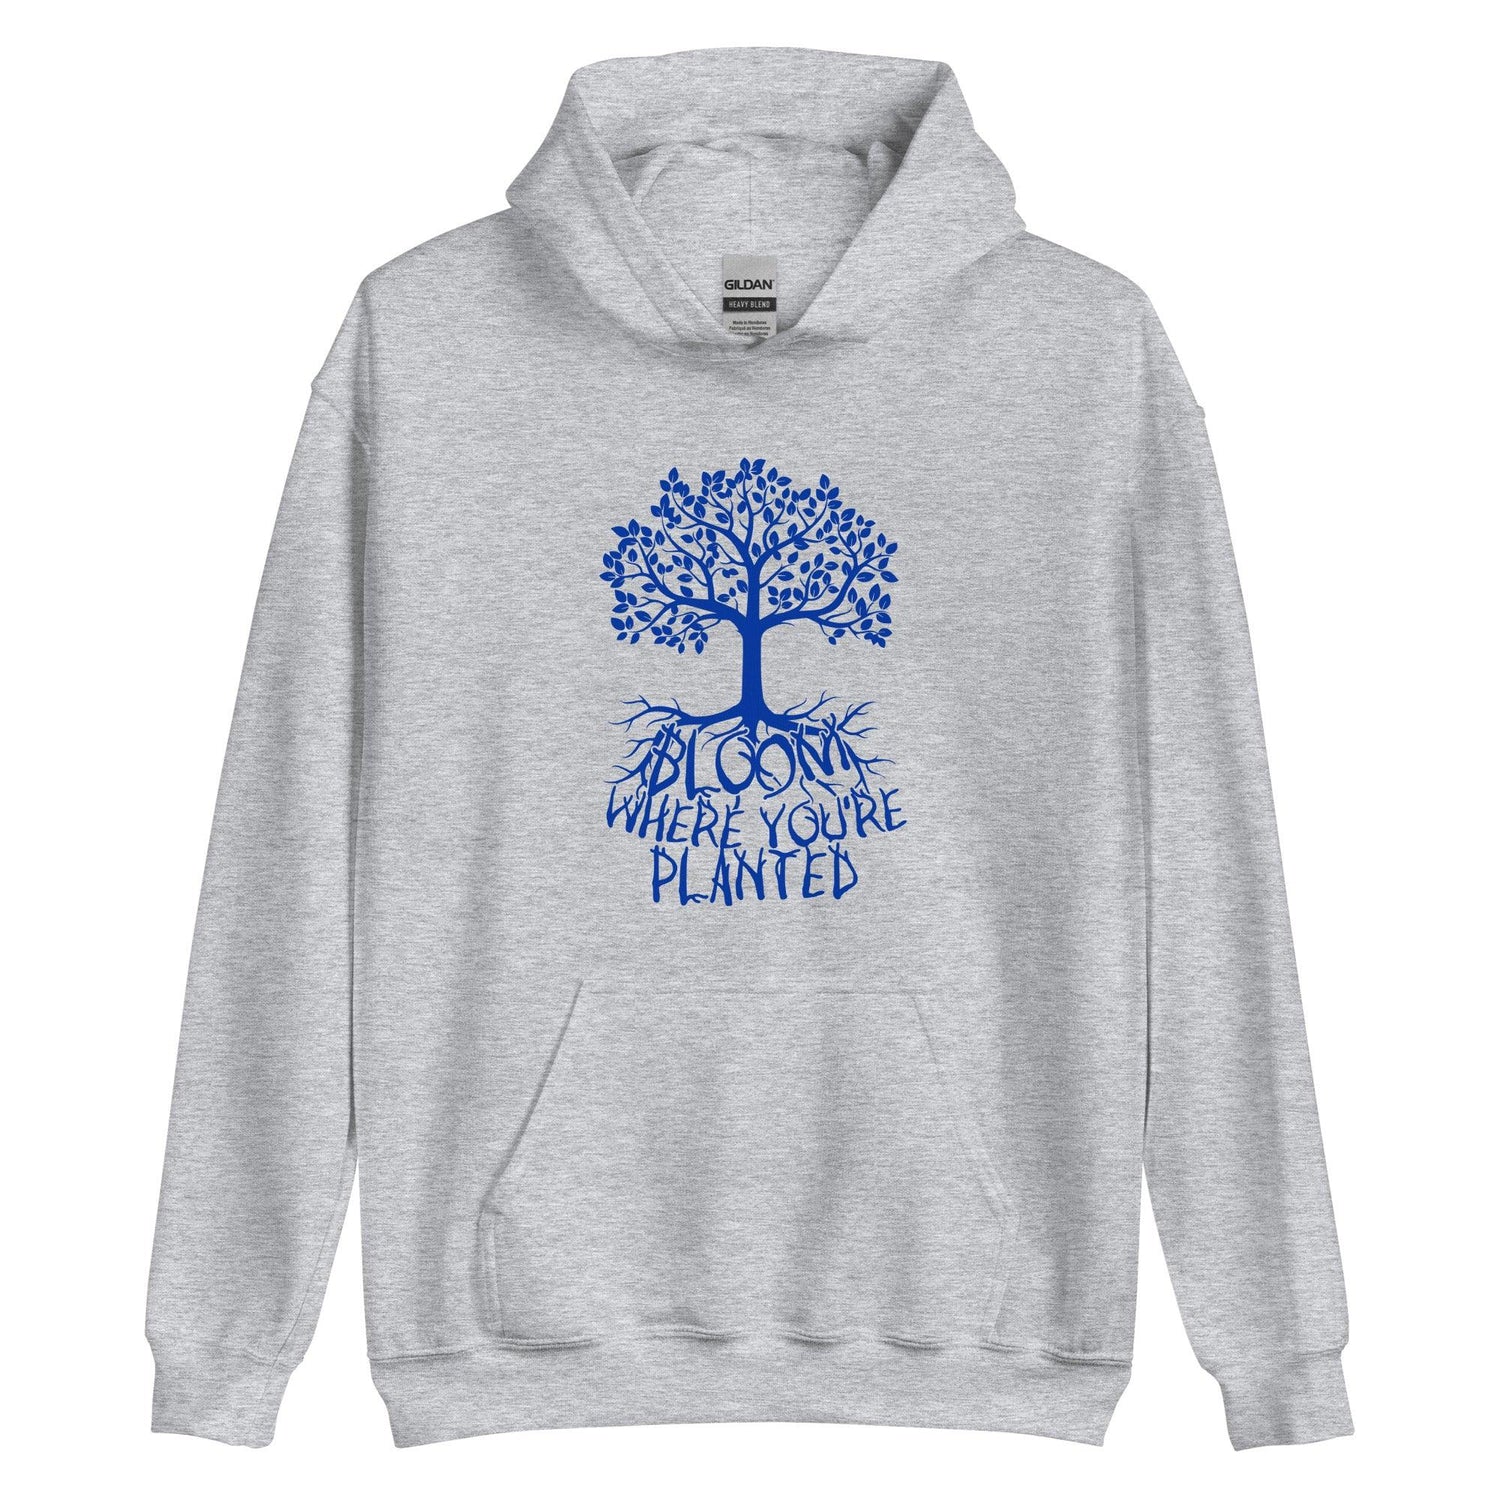 Nate Sestina "Where You're Planted" Hoodie - Fan Arch